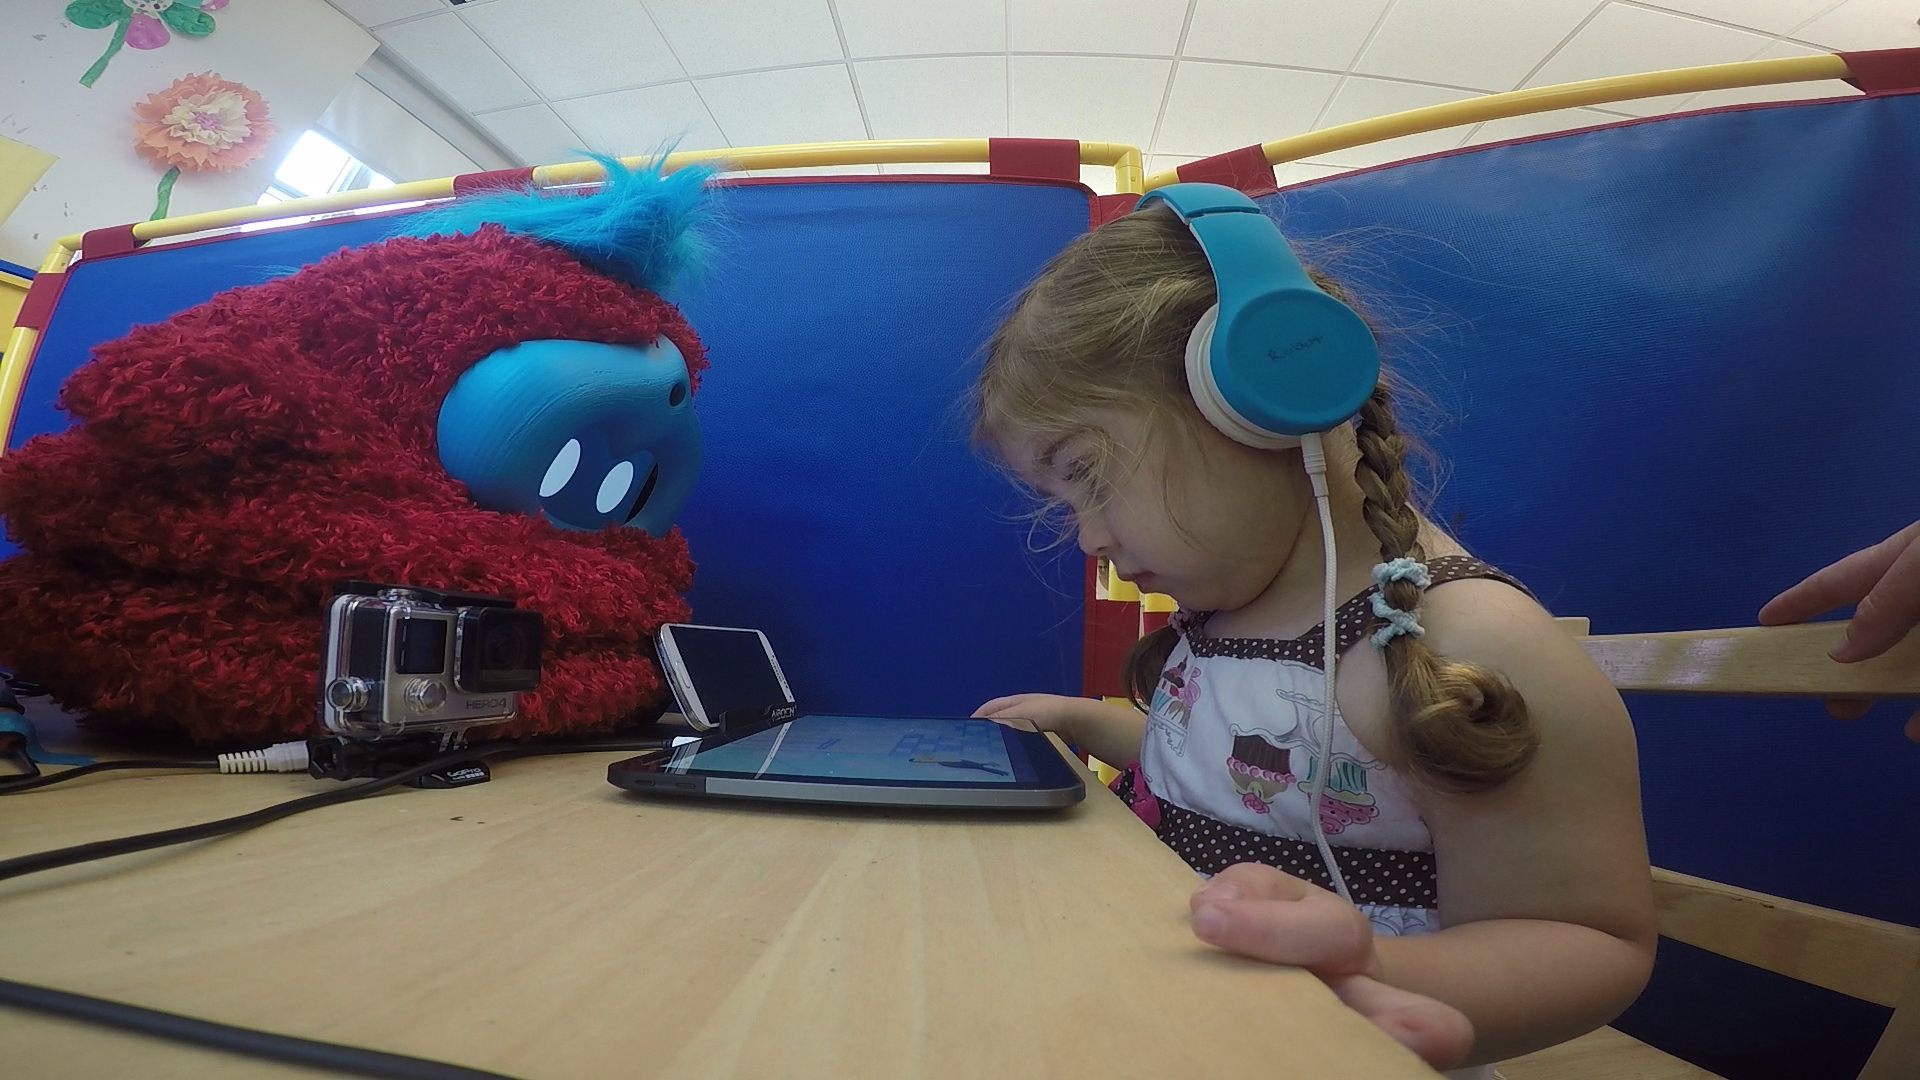 “Socially assistive” robot helps children learn